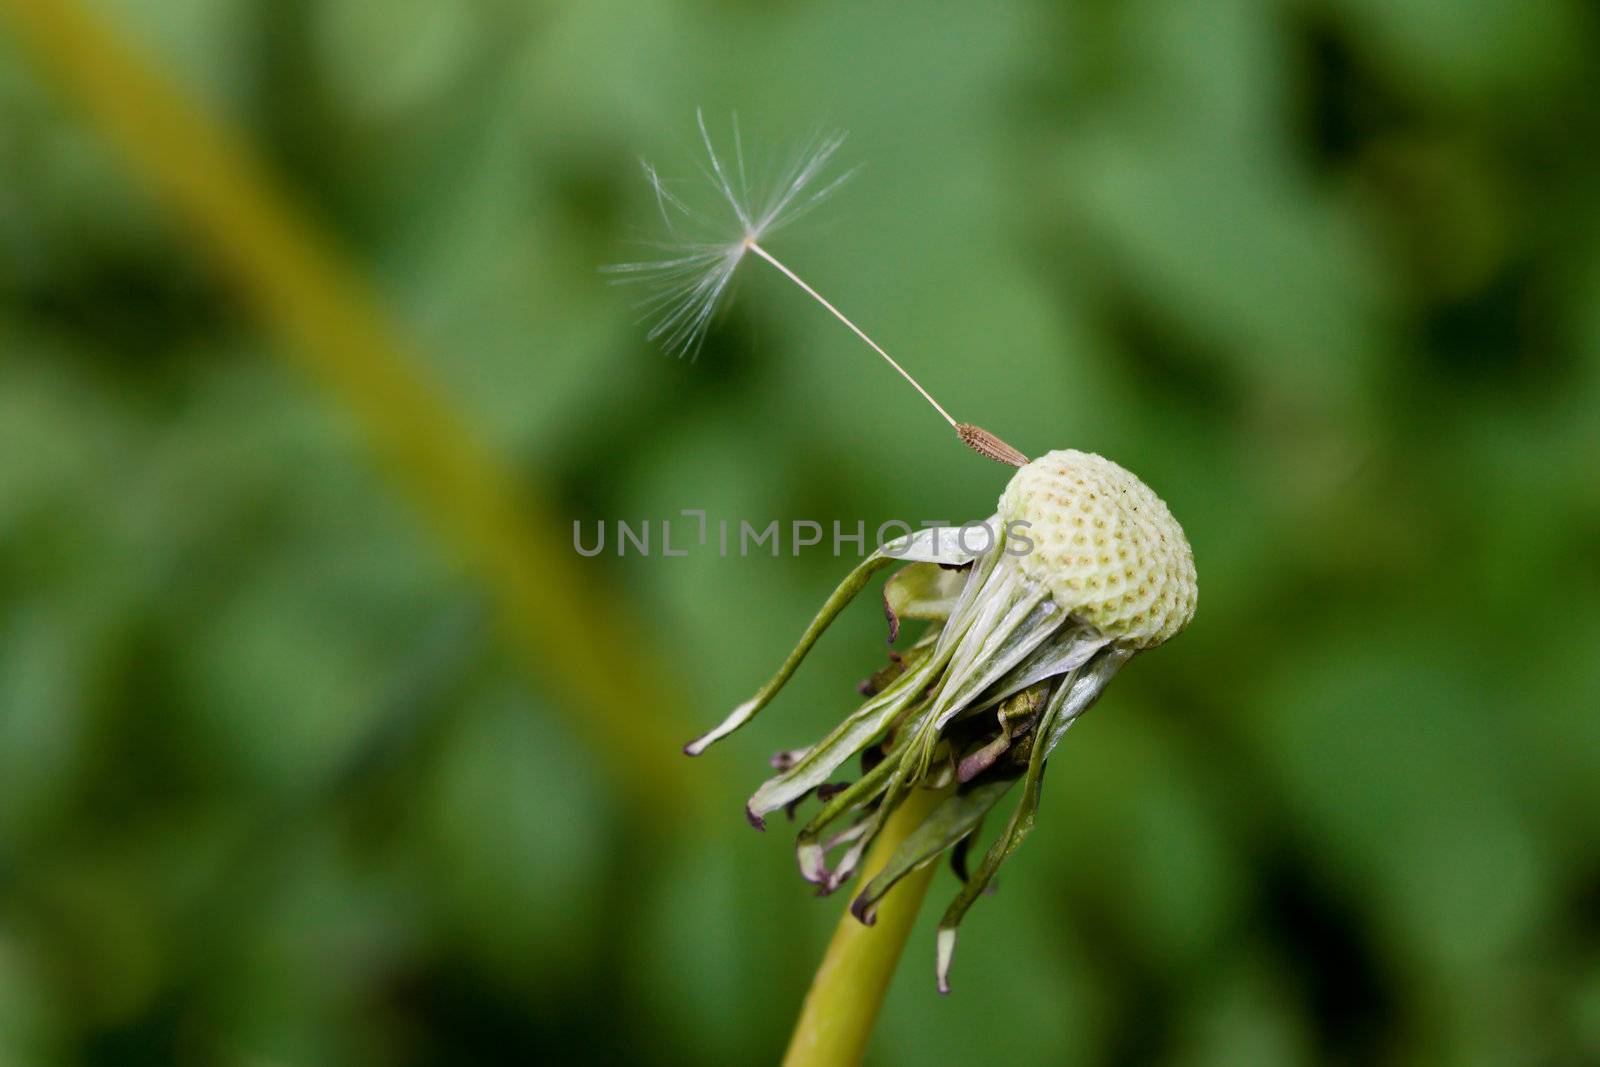 A Dandelion with one single seed left.